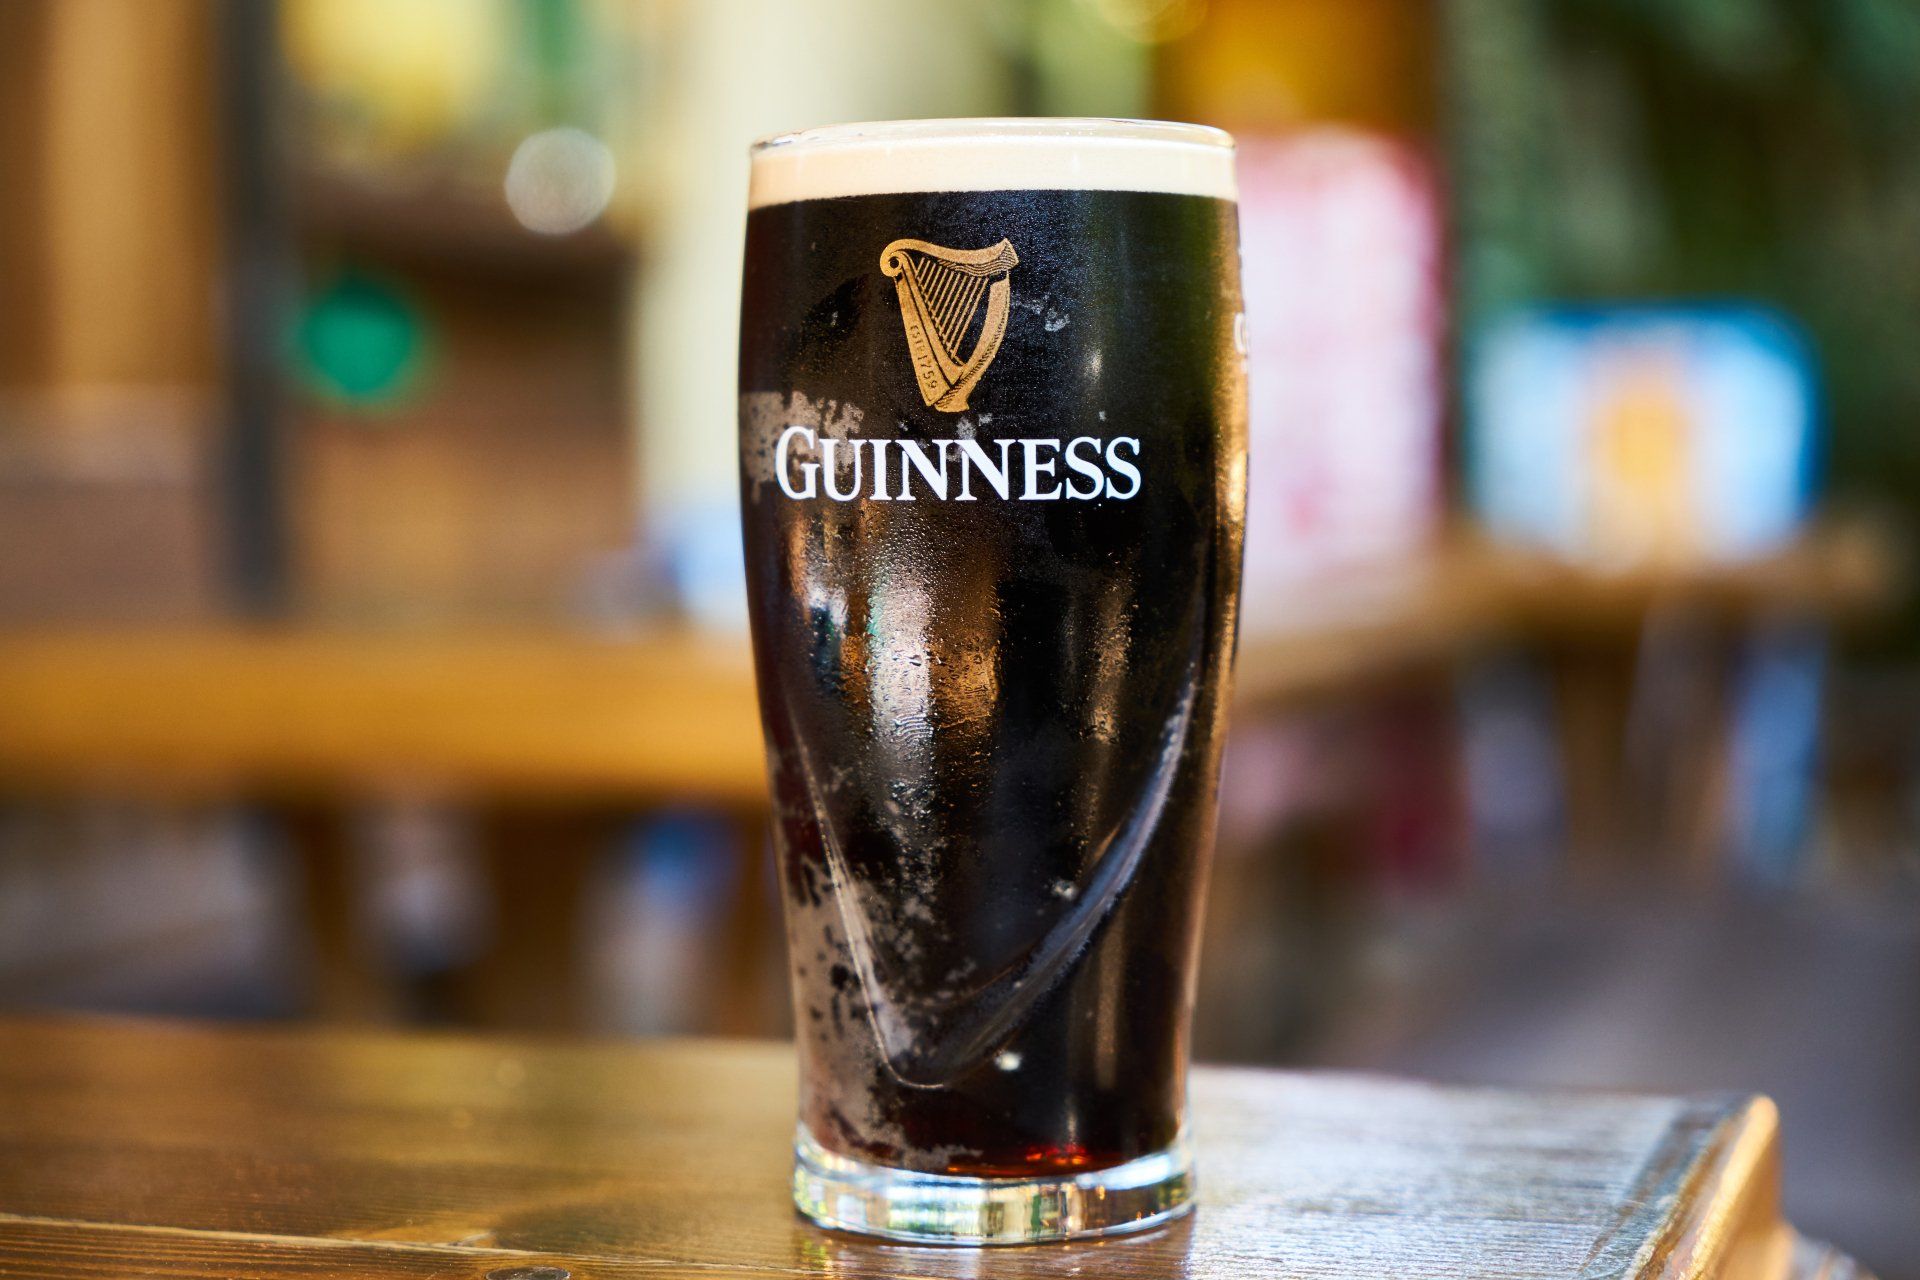 a glass of guinness beer is sitting on a wooden table .